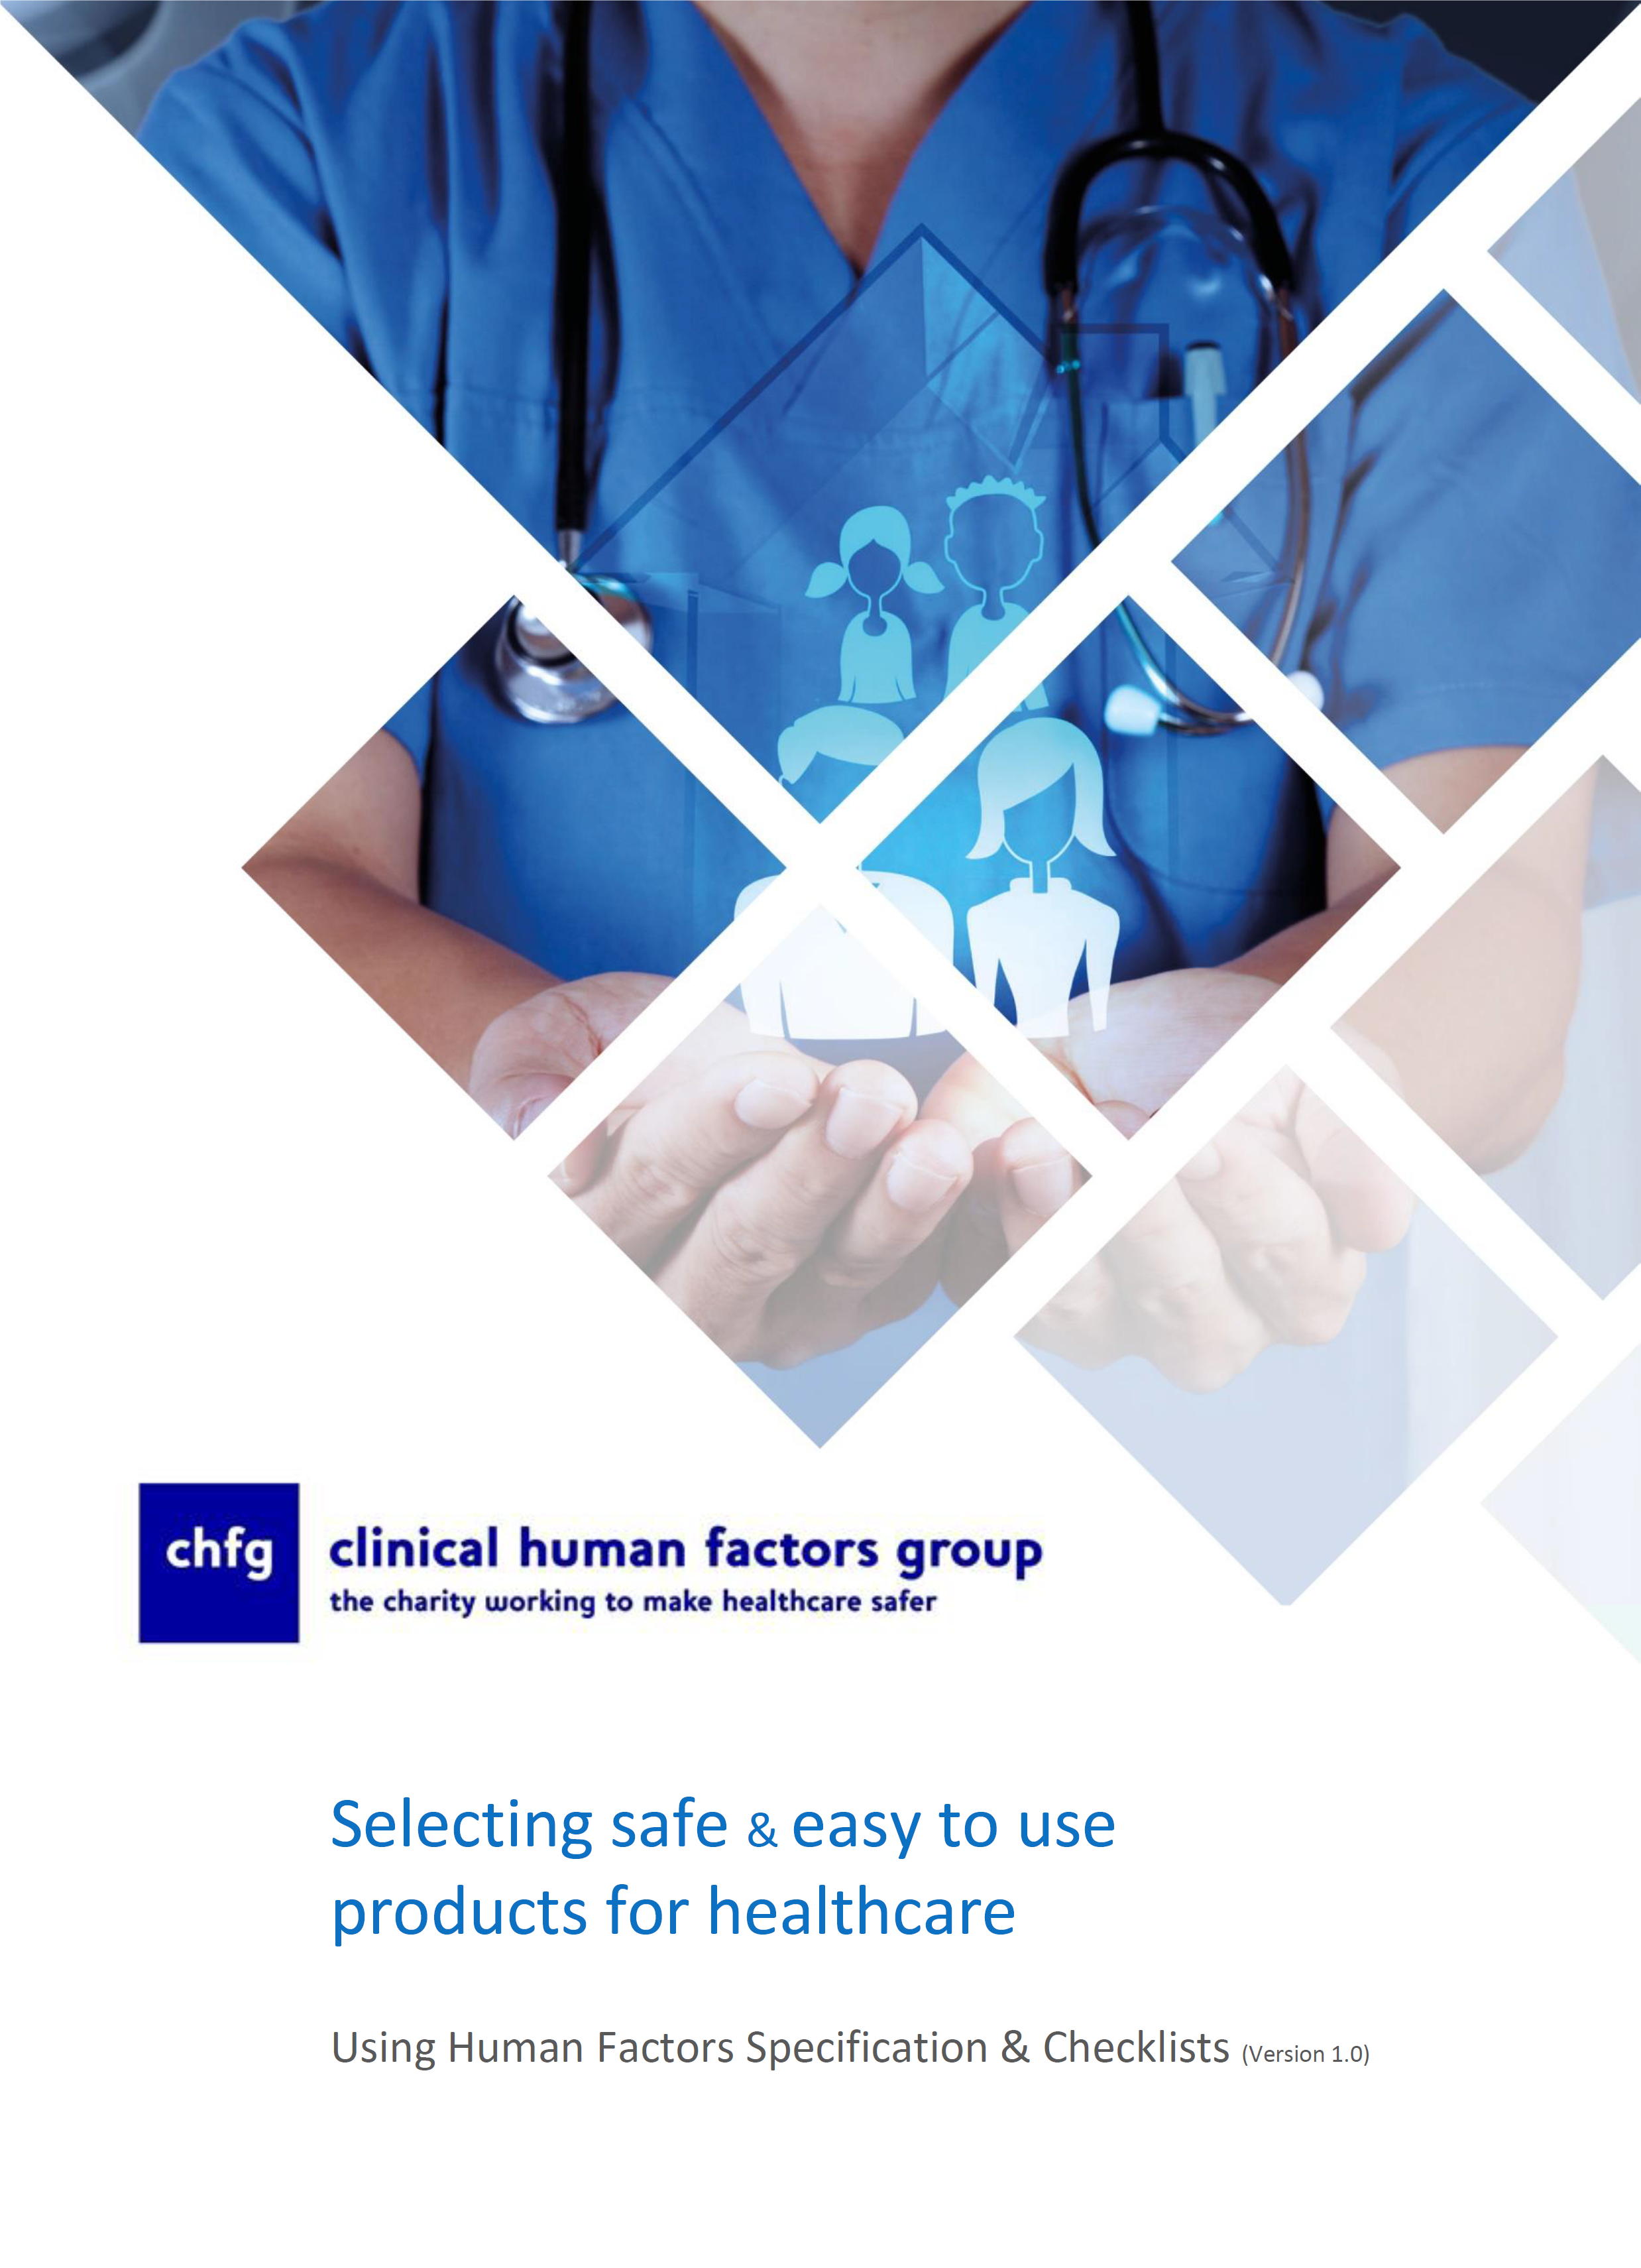 Selecting safe and easier to use products for healthcare using Human Factors specification and checklists